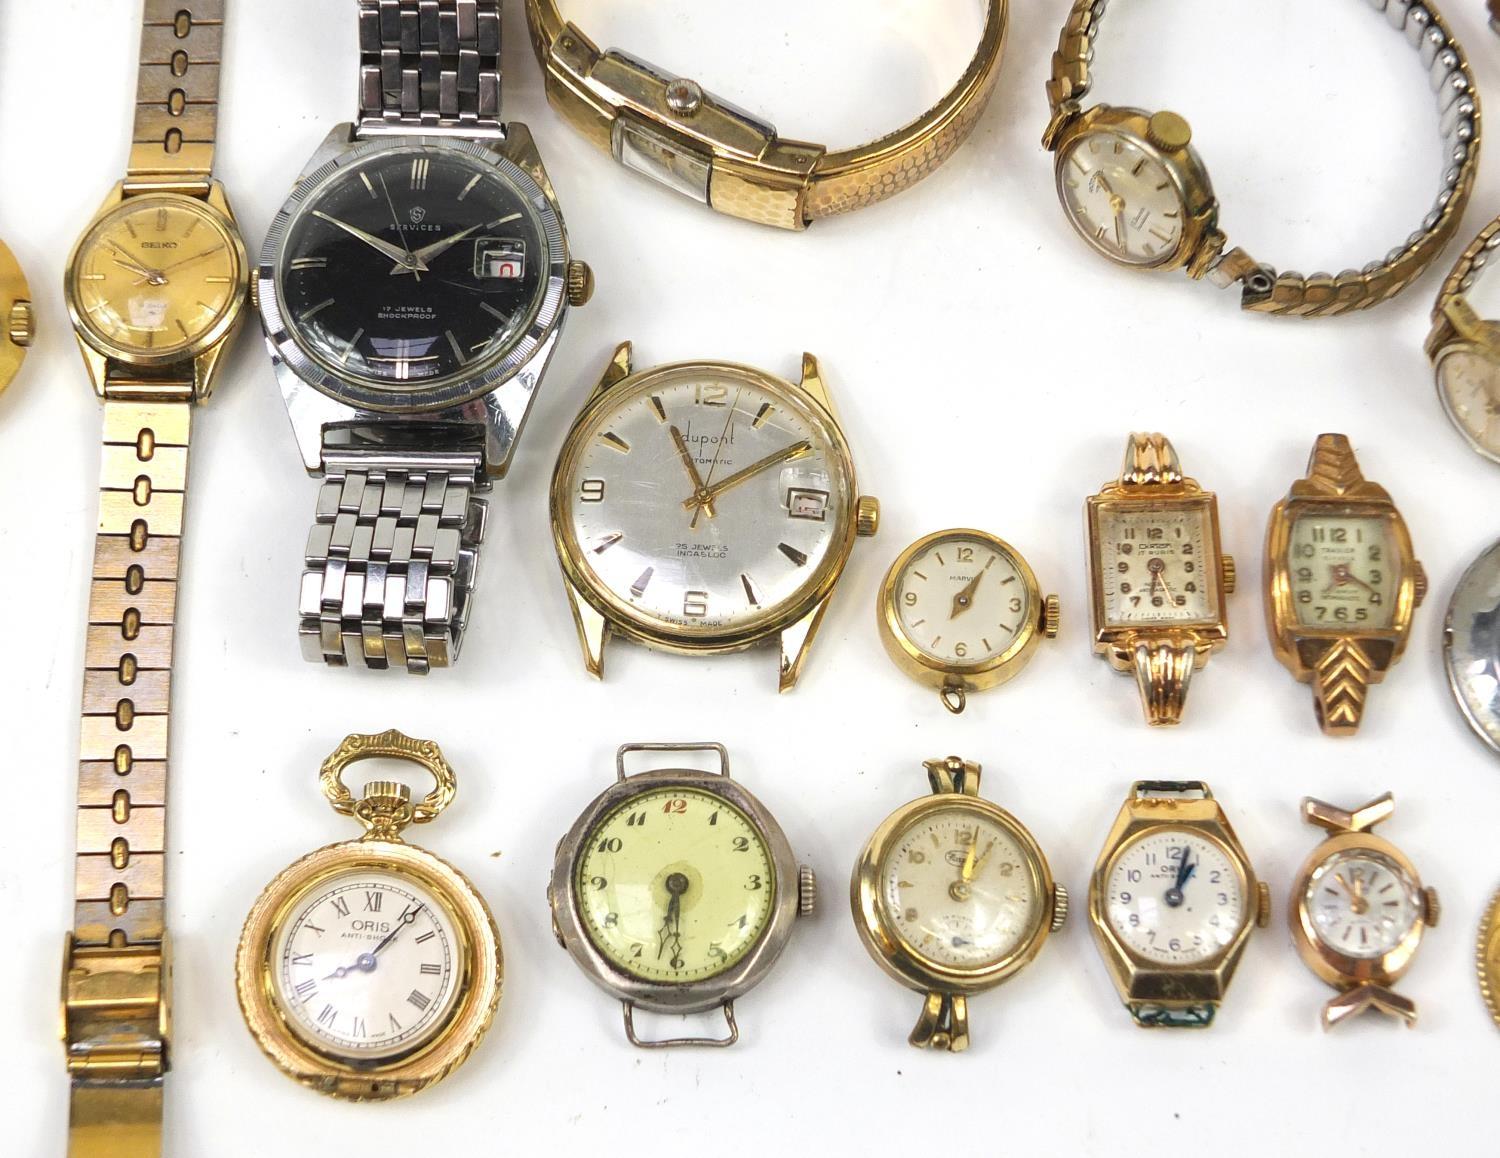 Vintage and later wristwatches including Dupont Automatic, Services, Rotary and Oris - Image 3 of 6